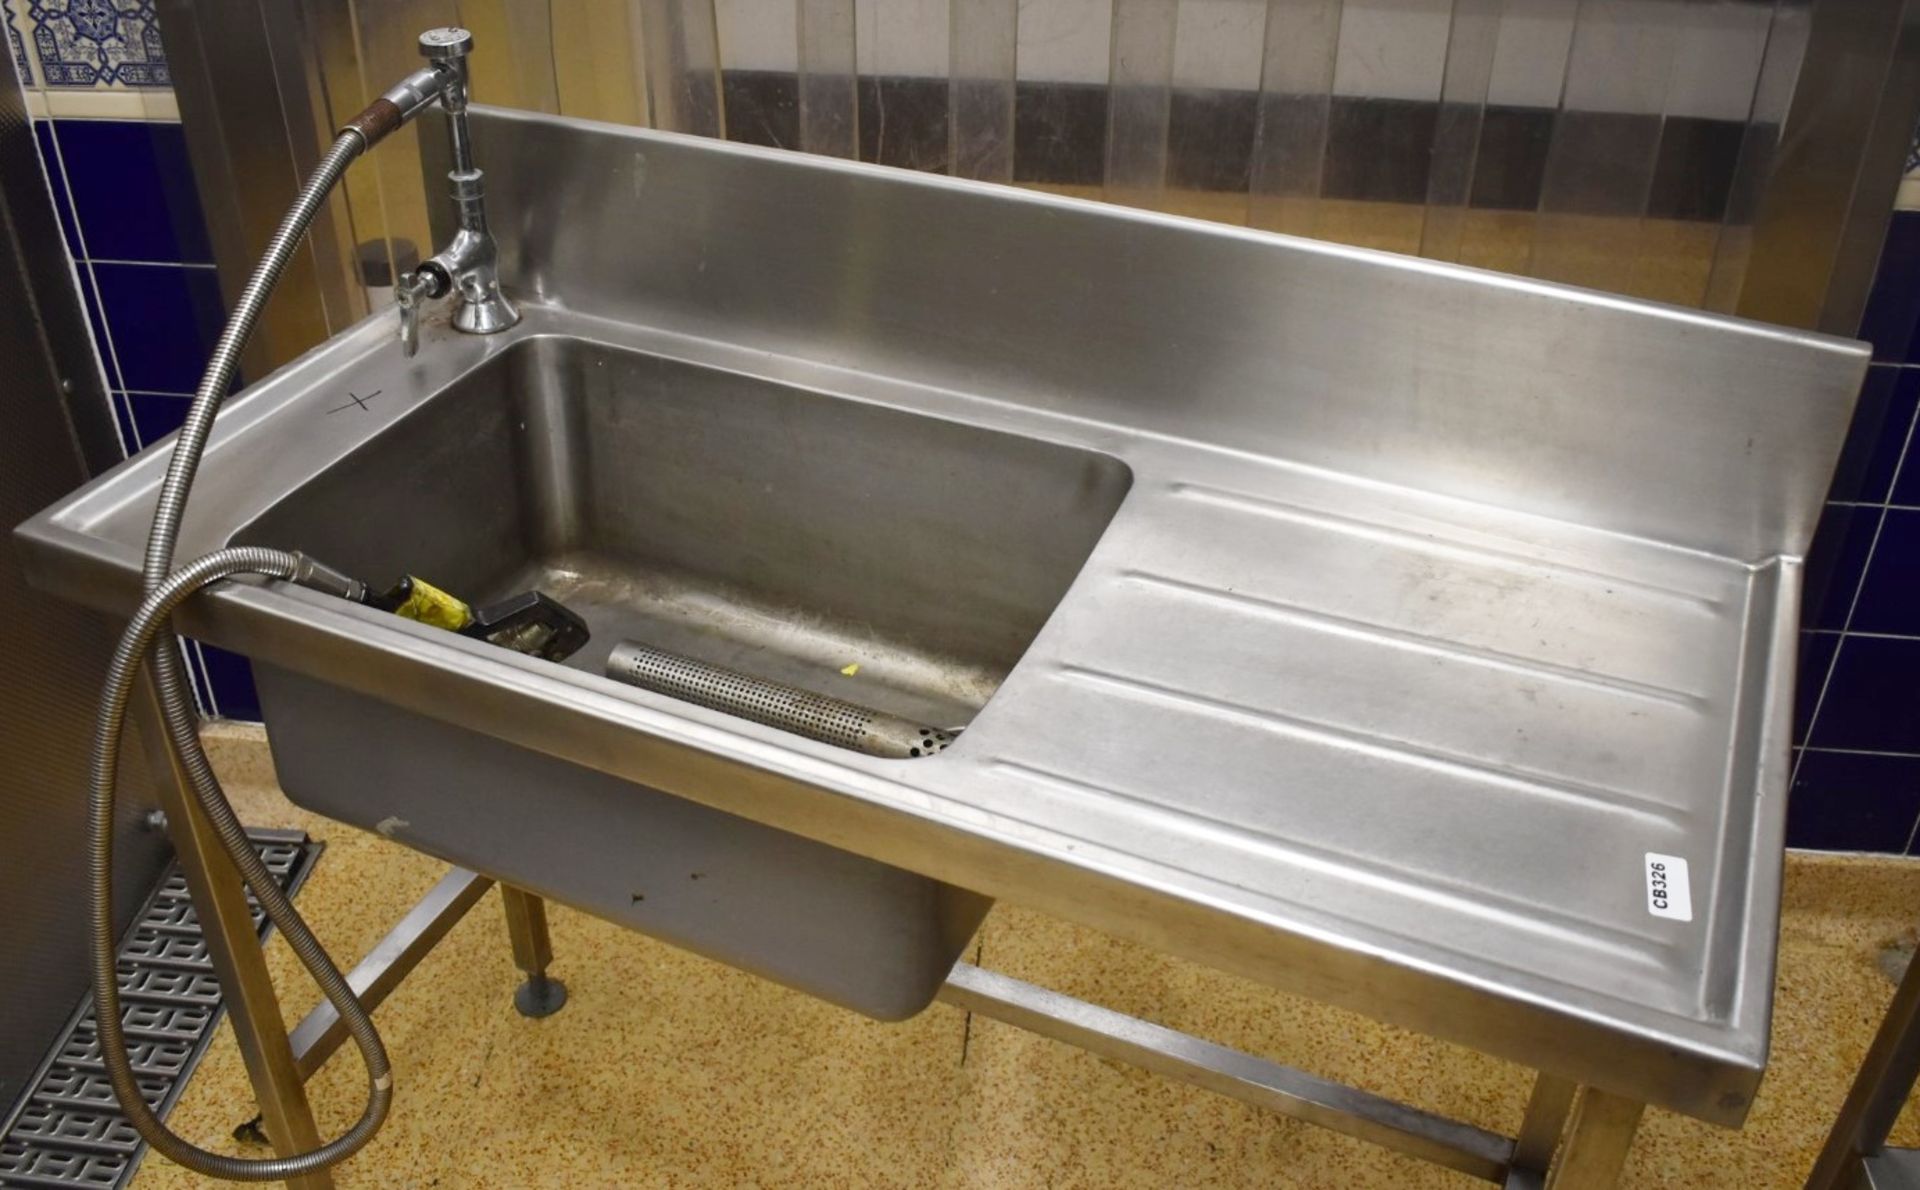 1 x Stainless Steel Sink Basin Wash Unit With Splashback and Hose Rinser Tap - H81 x W105 x D50 - Image 4 of 4